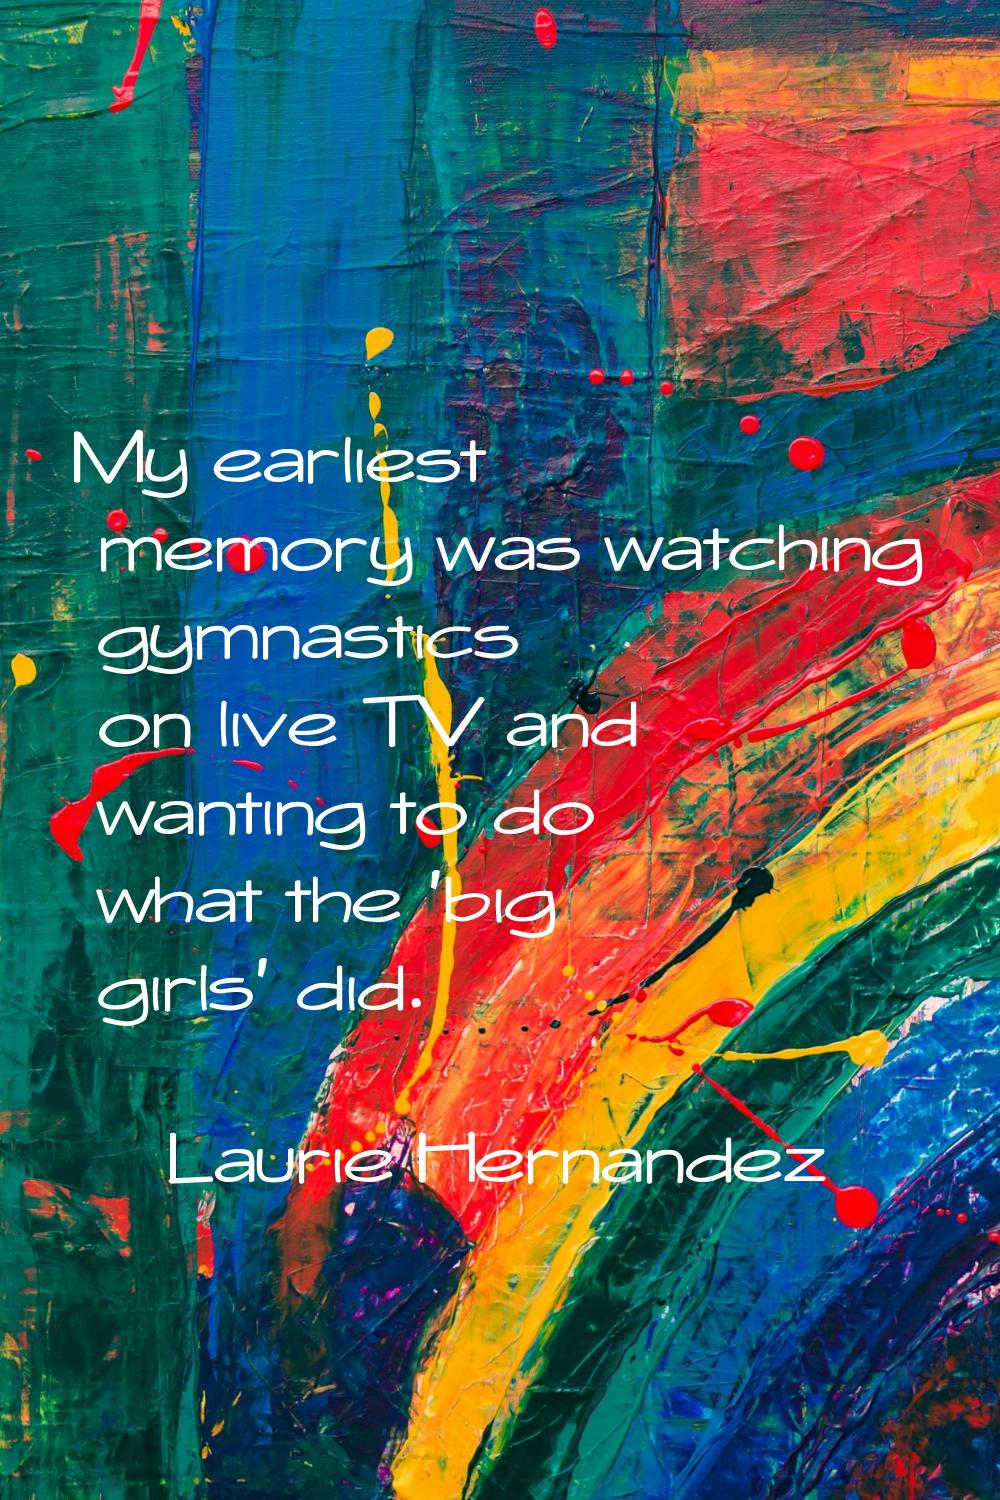 My earliest memory was watching gymnastics on live TV and wanting to do what the 'big girls' did.